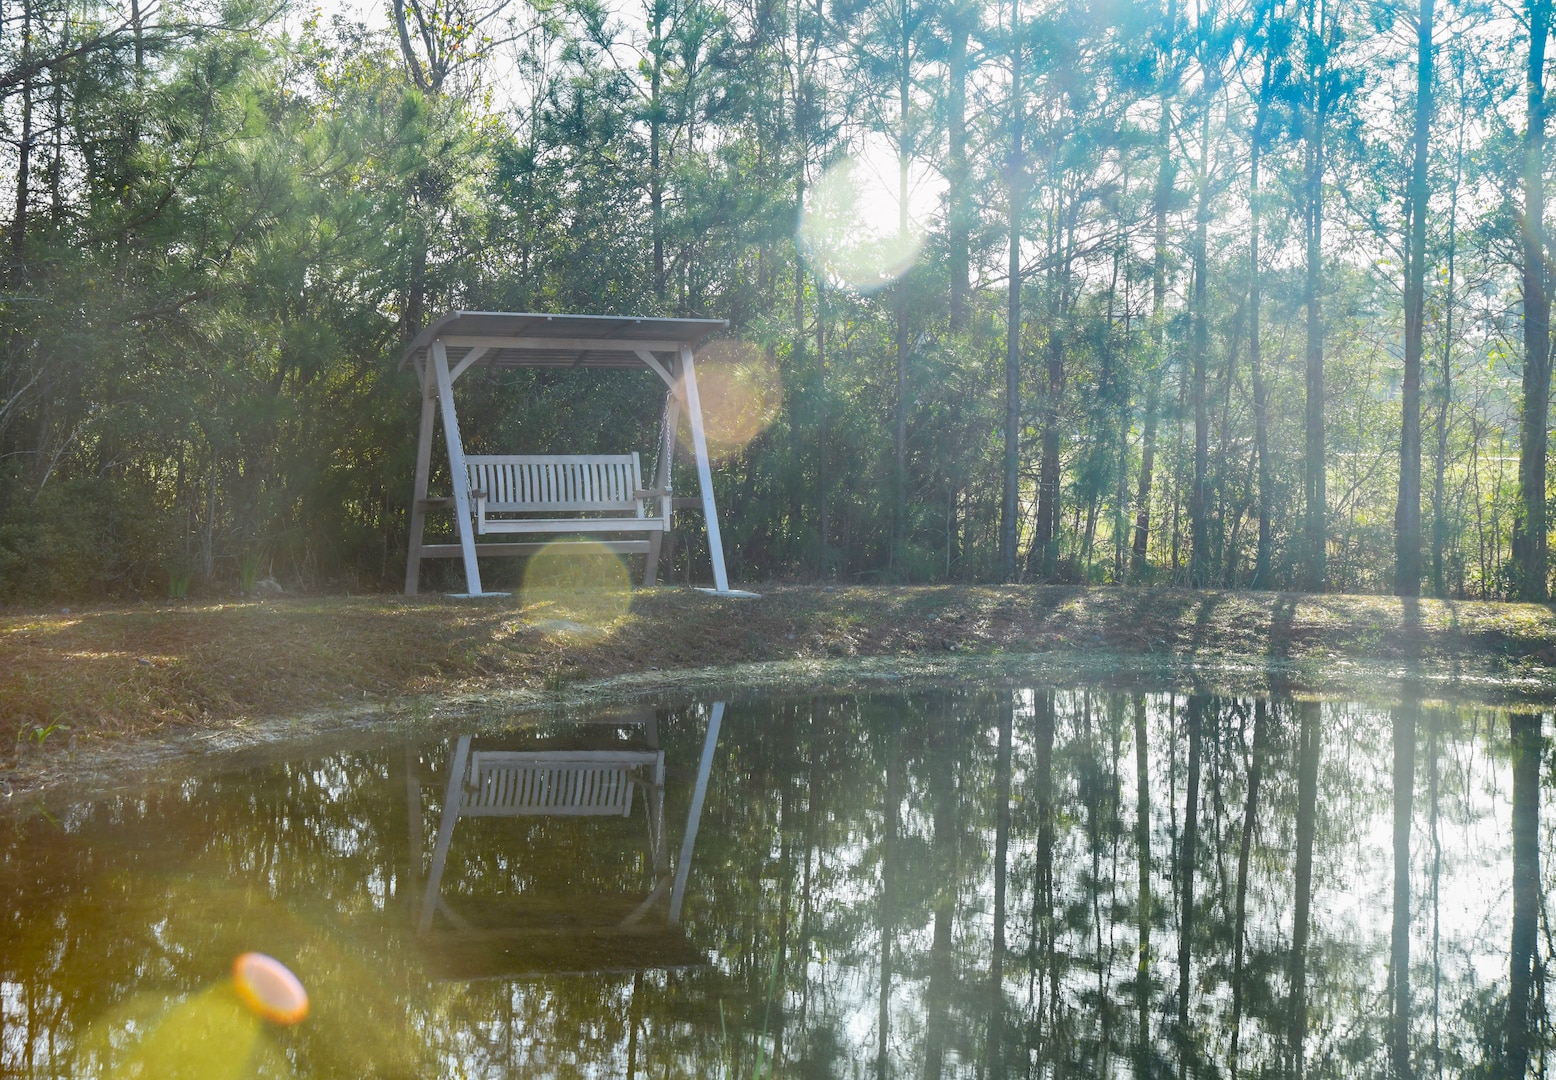 The Warrior Garden at Intrepid Spirit Center Camp Lejeune offers a space for serenity to clinic patients. The garden encourages nature-based therapy which encourages service members to connect with nature as part of their healing journey from a brain injury or illness.